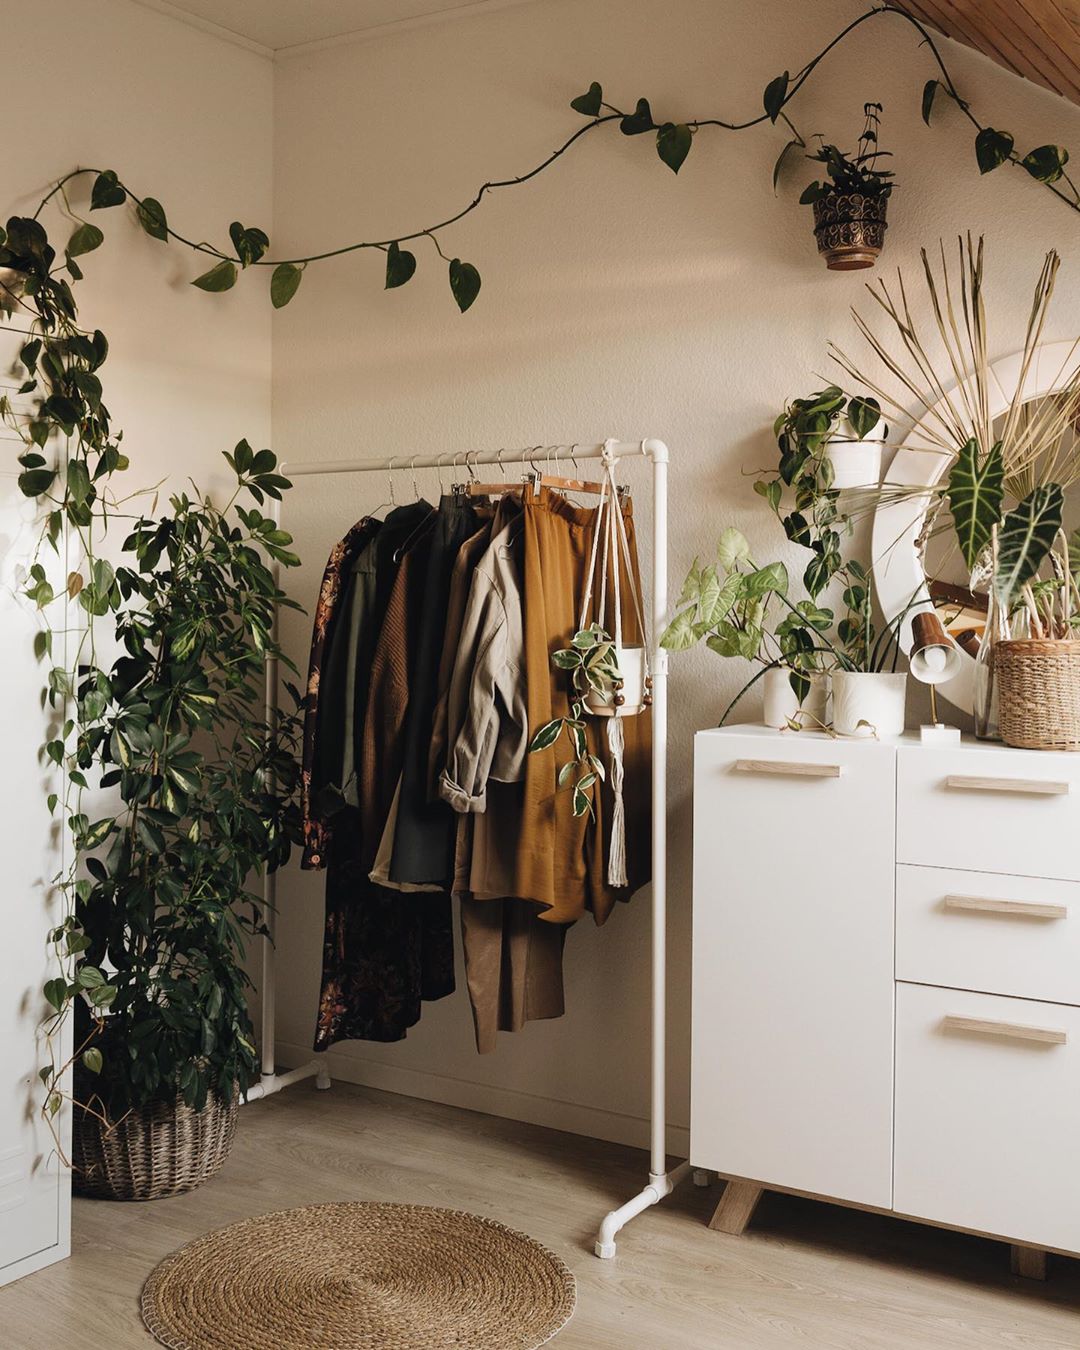 Minimalist bedroom with hanging rack for clothes. Photo by Instagram user @friederikchen 